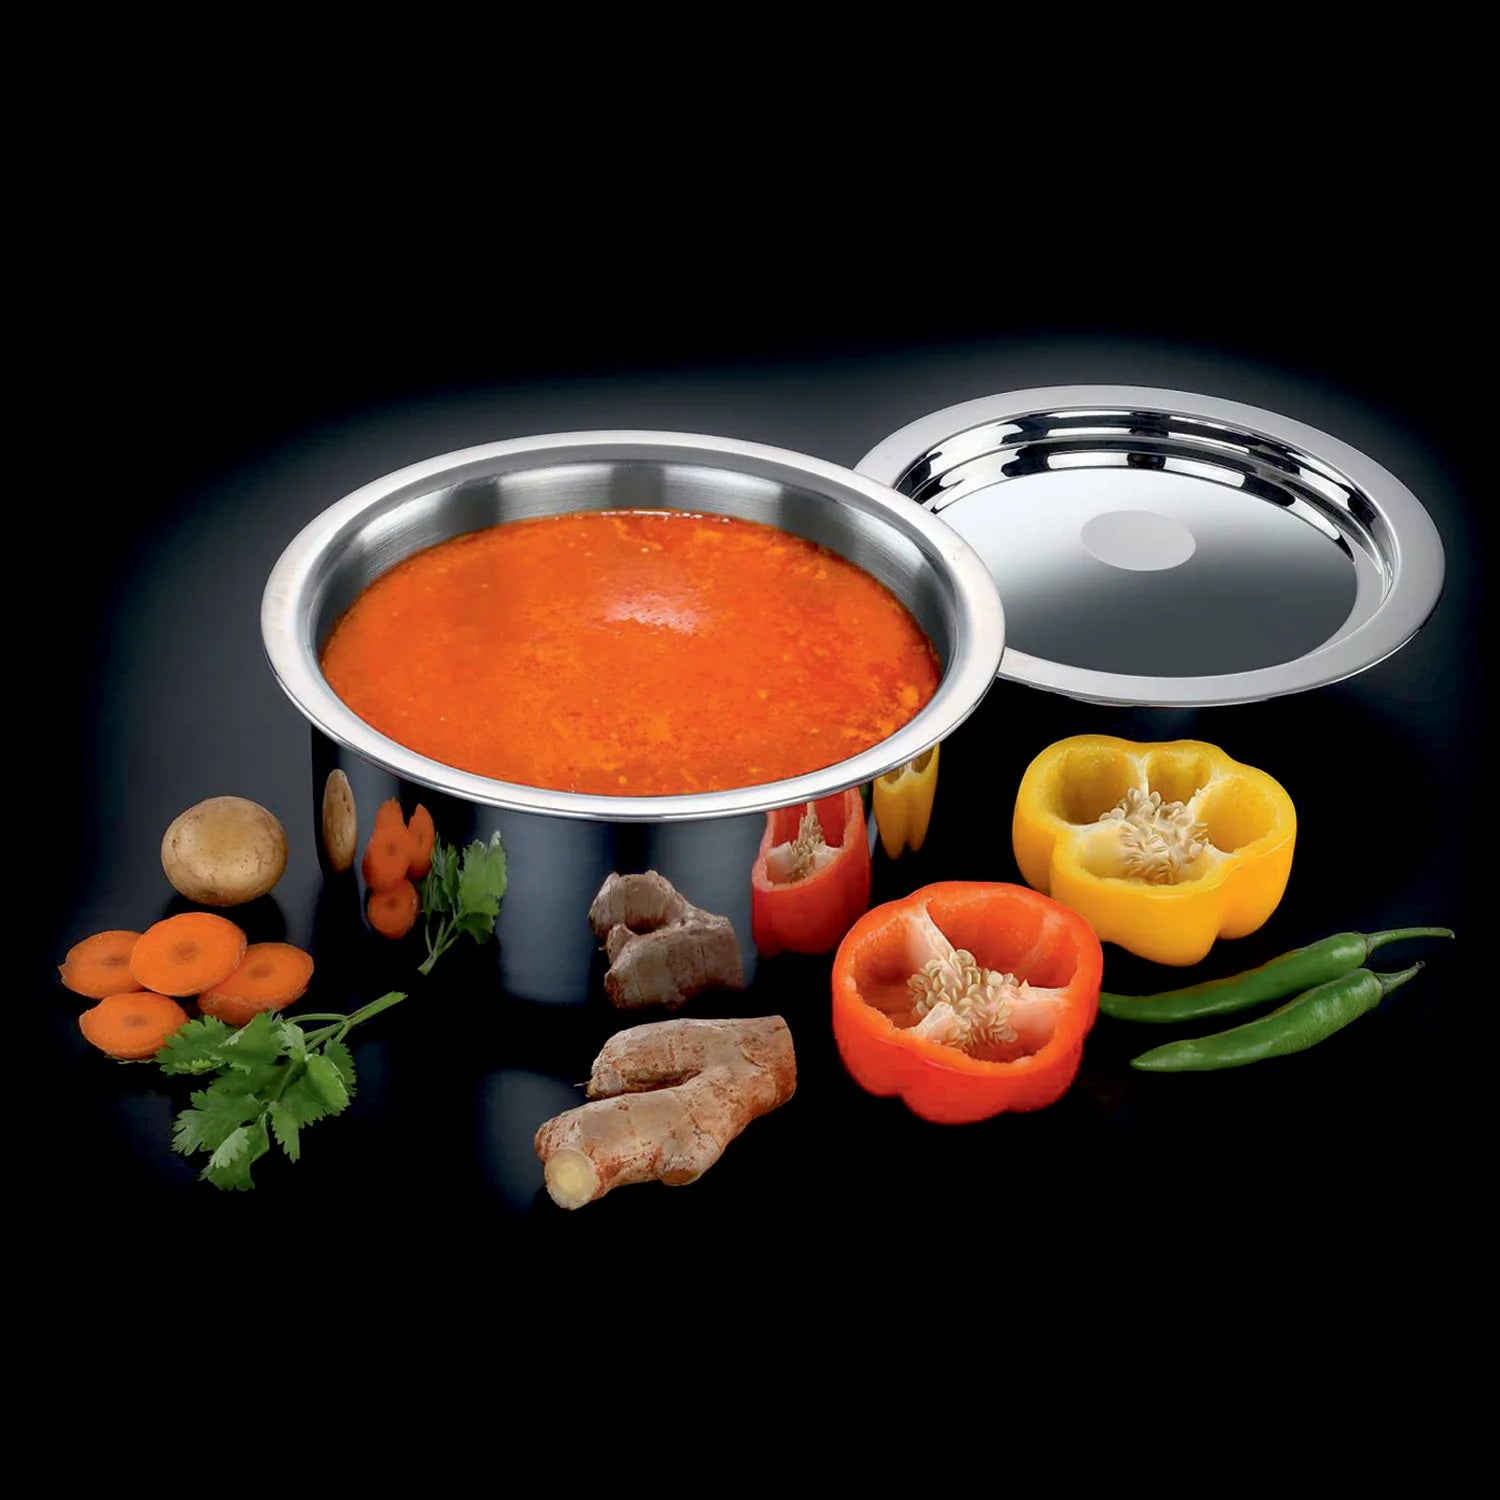 AVIAS Riara premium stainless steel Triply Tope for cooking quality food